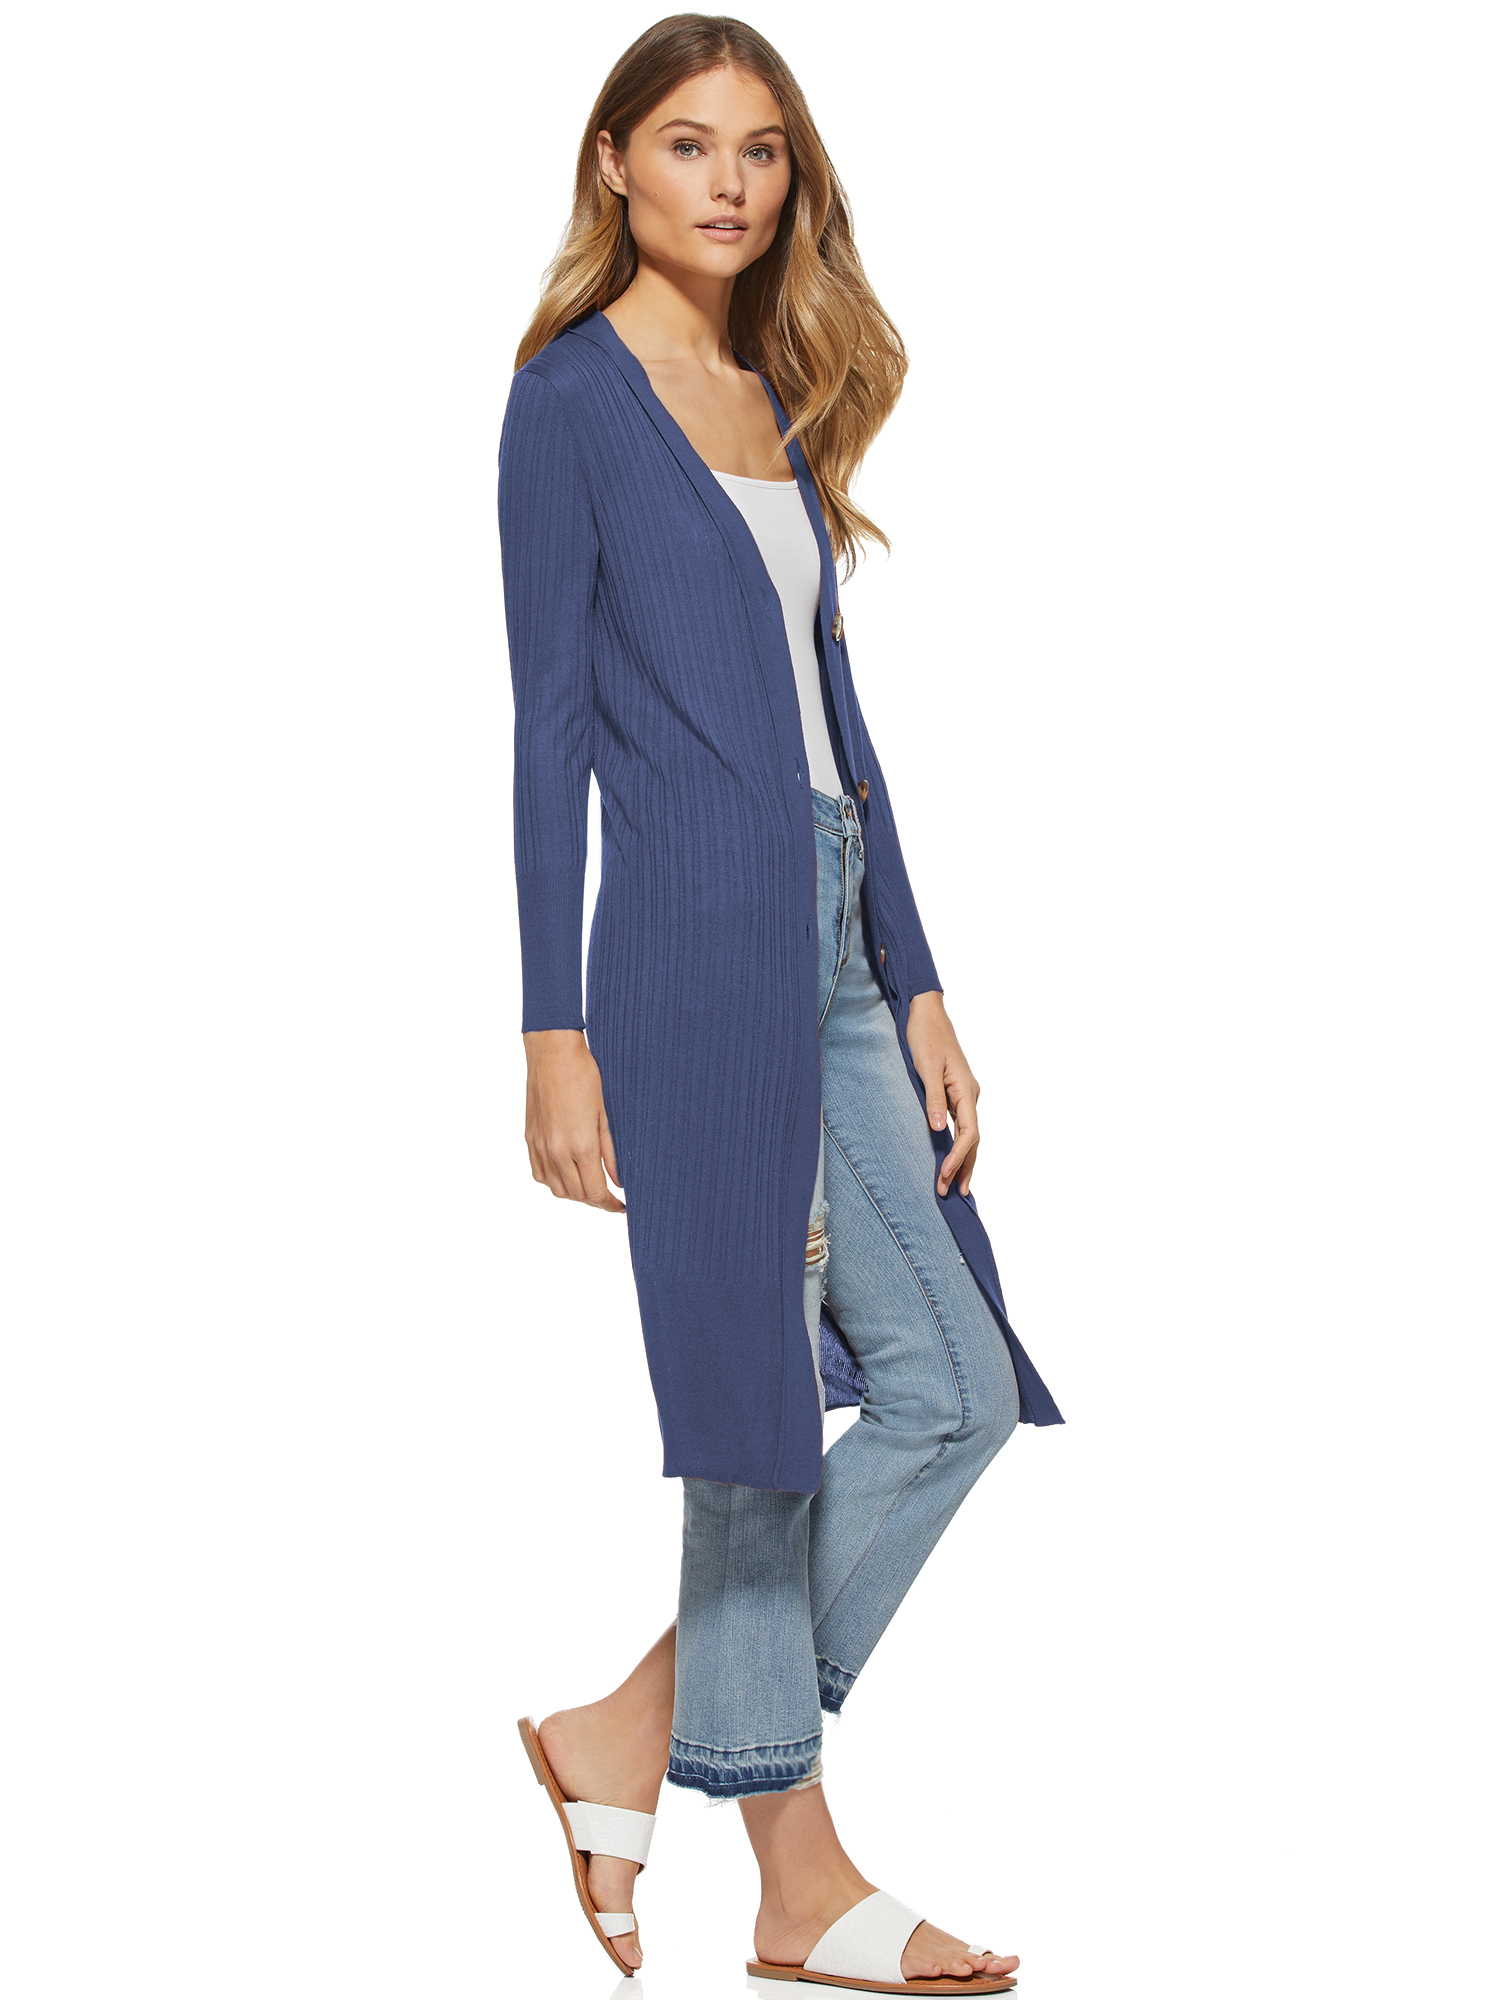 Scoop Women’s Long Cardigan Button Front Knit Sweater - image 4 of 6